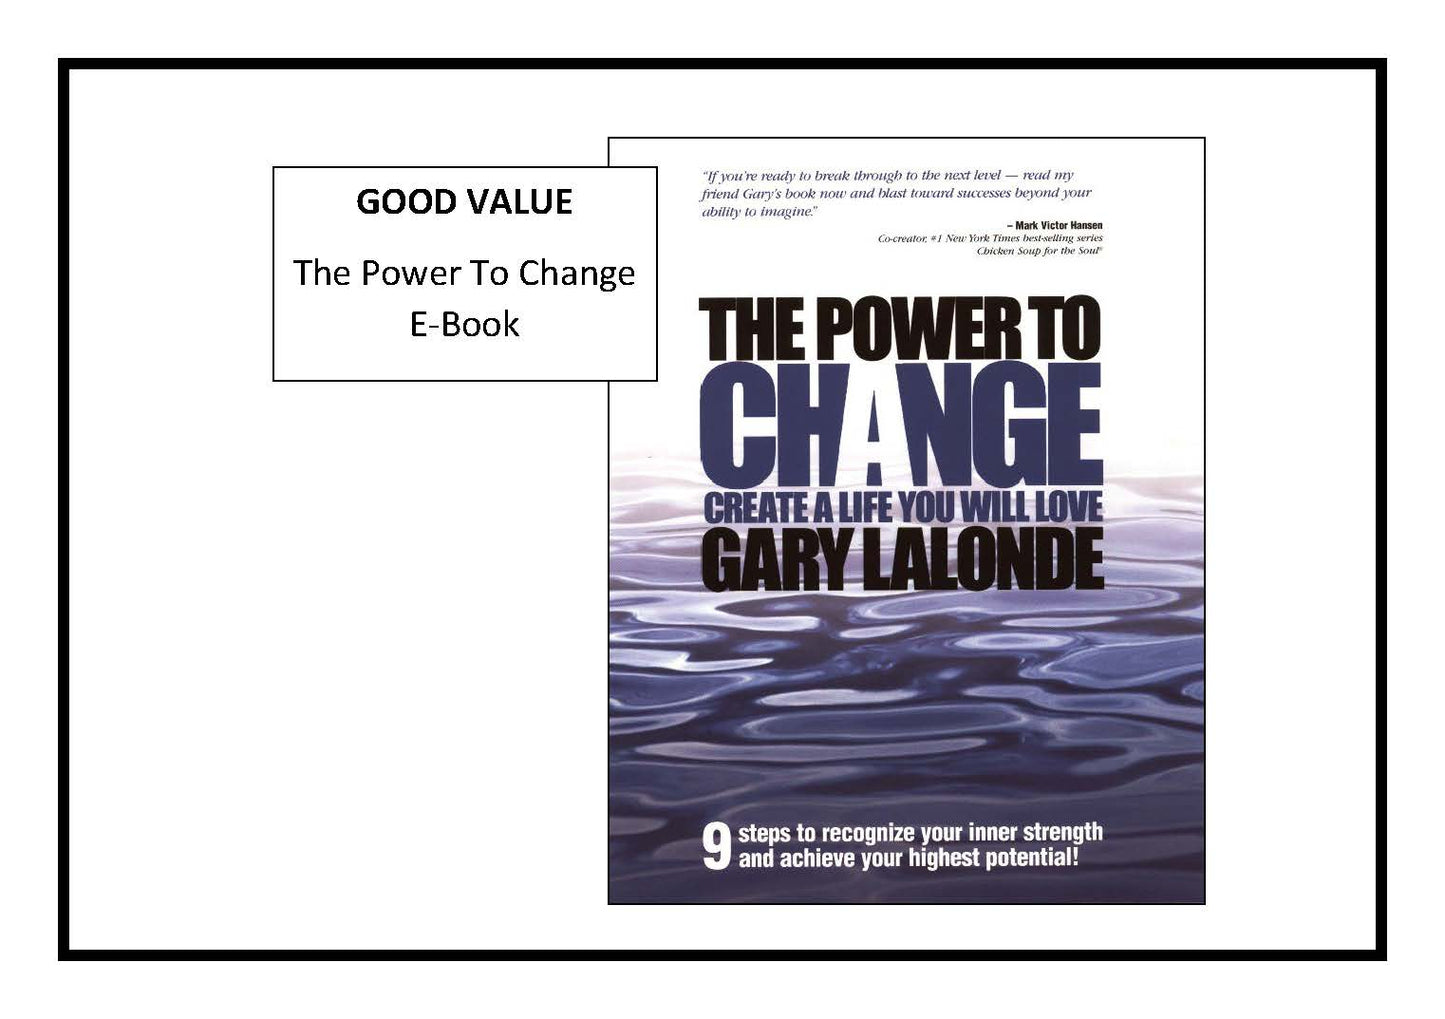 The Power to Change (EBook)